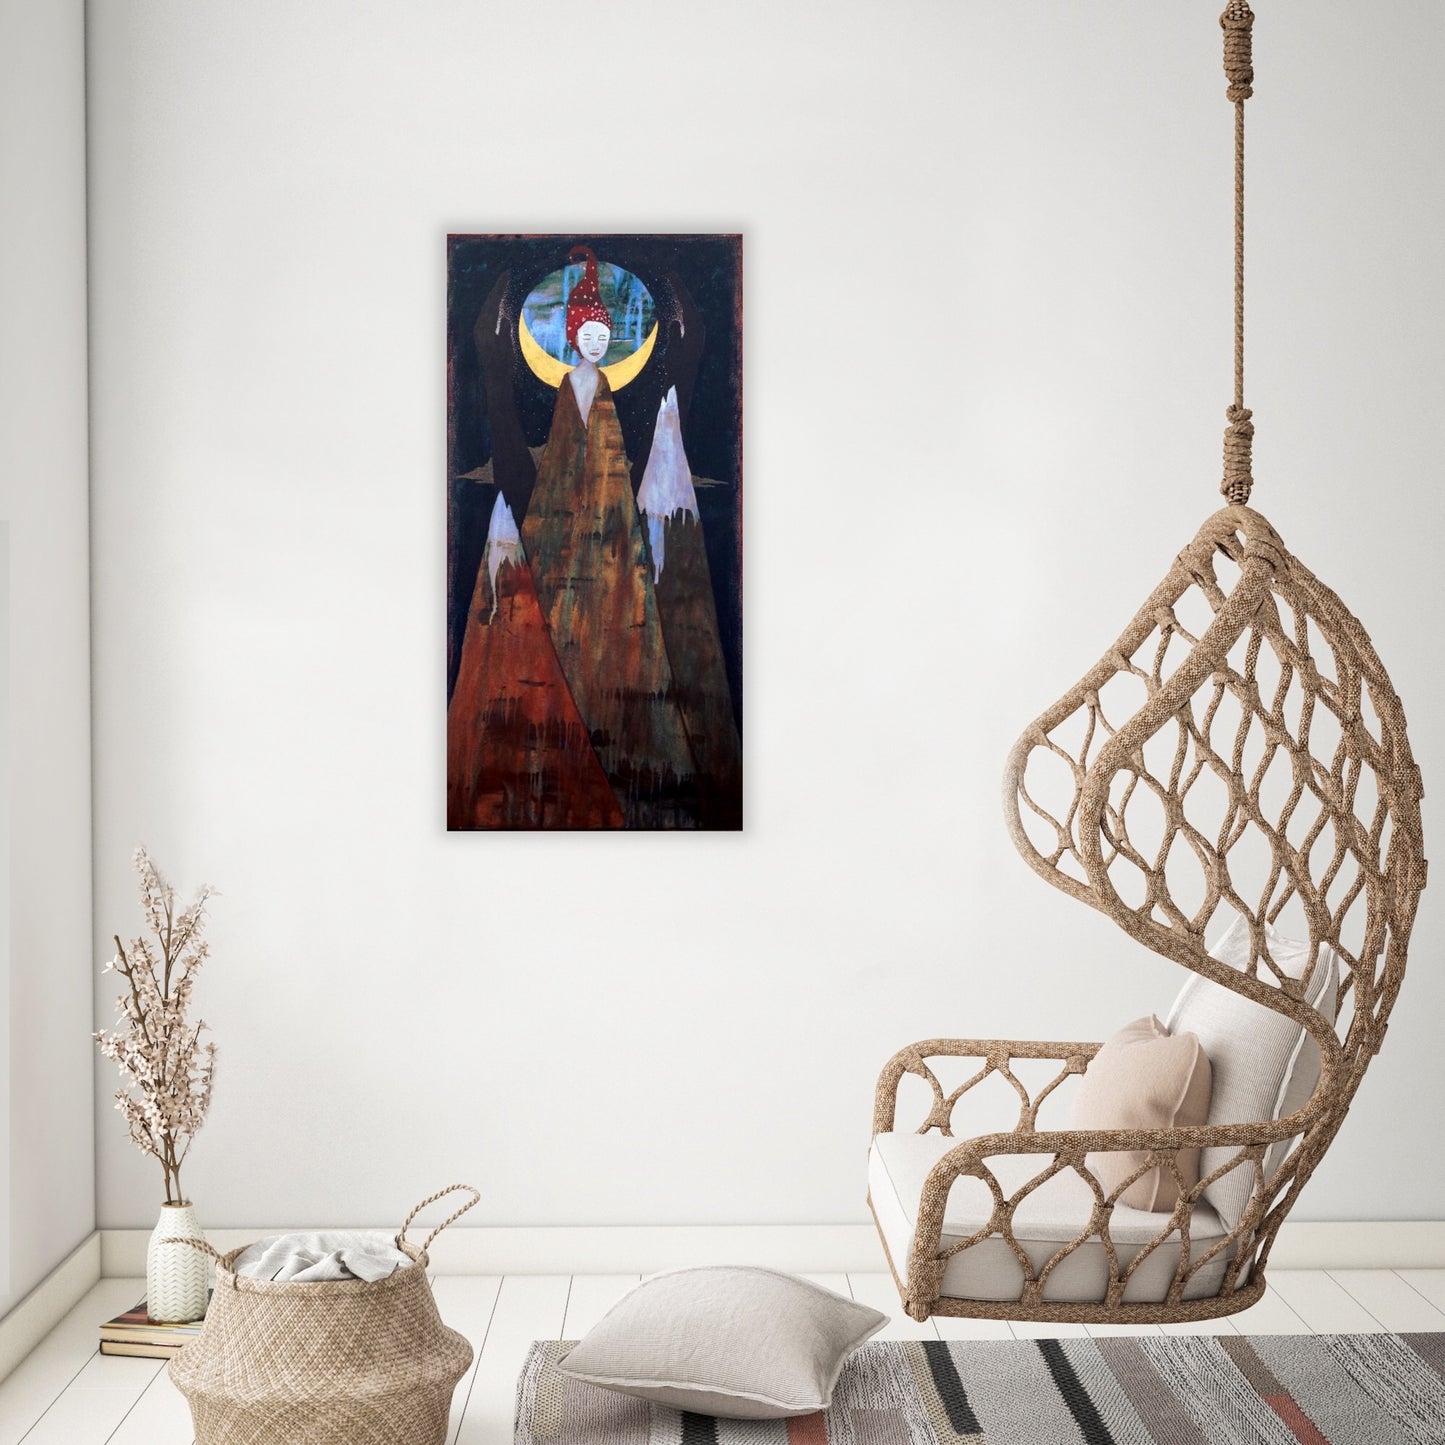 spiritual feminine artwork hanging on a white wall in a living room with a chair suspended from the ceiling, a basket and a pot of flowers